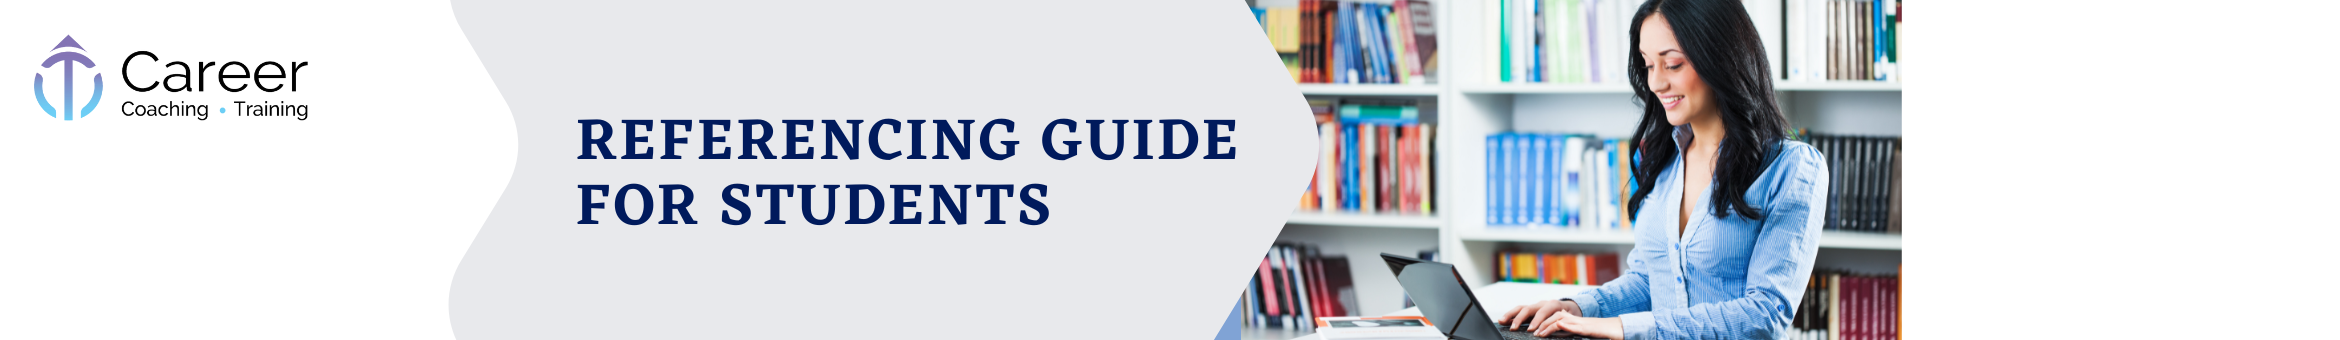 Referencing Guide for Students